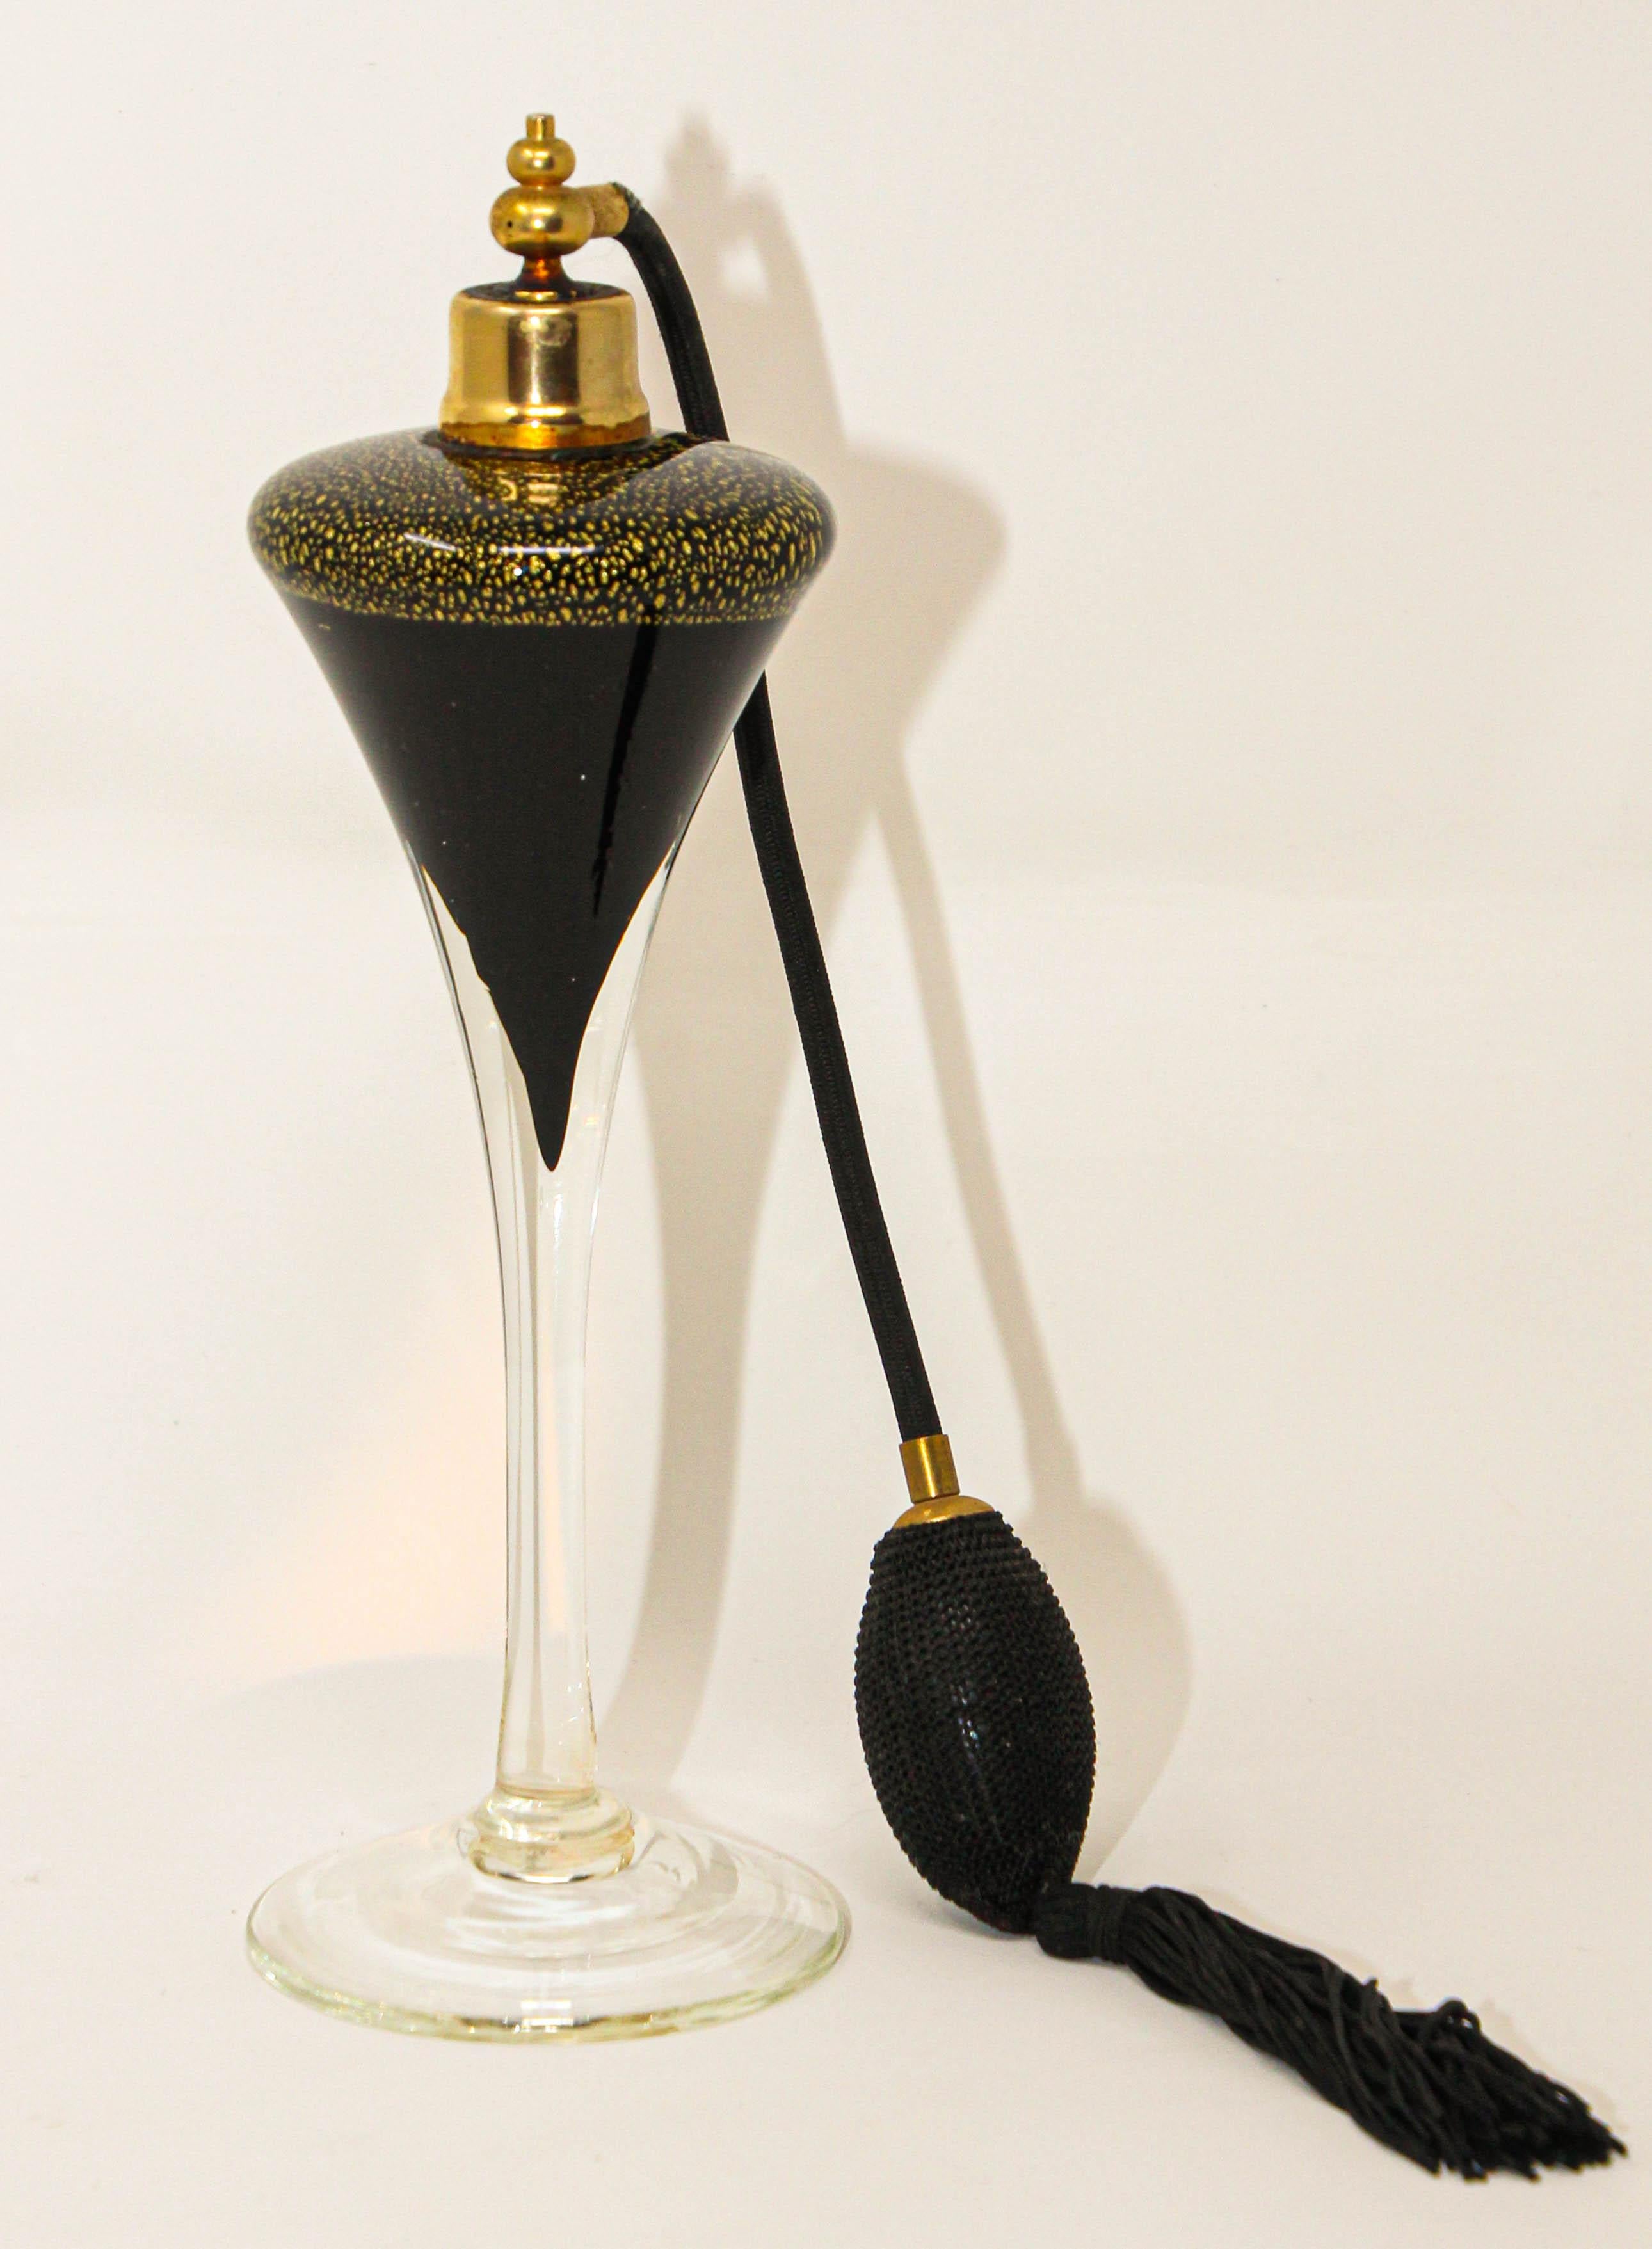 Art Deco Vintage Archimede Seguso Tall Black and Gold Perfume Bottle 1960's.
Vintage Art Deco style Archimede Seguso tall black and gold aventurine perfume bottle with black silk atomizer.
Italian Murano art glass perfume bottle black glass with